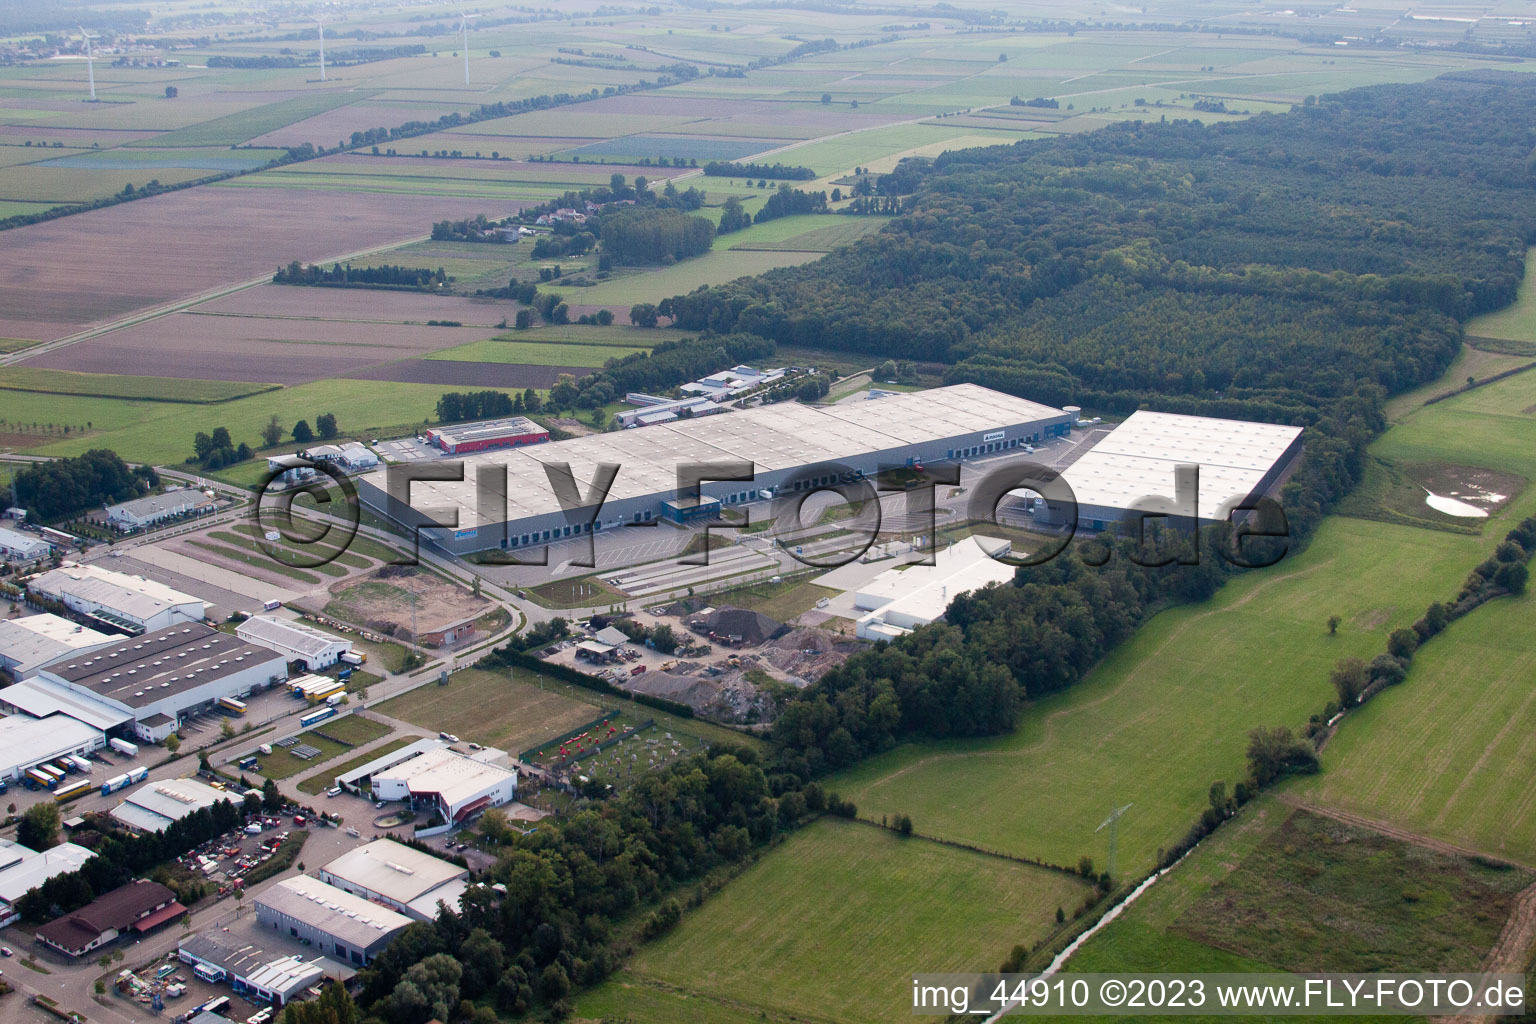 Bird's eye view of Horst industrial area in the district Minderslachen in Kandel in the state Rhineland-Palatinate, Germany